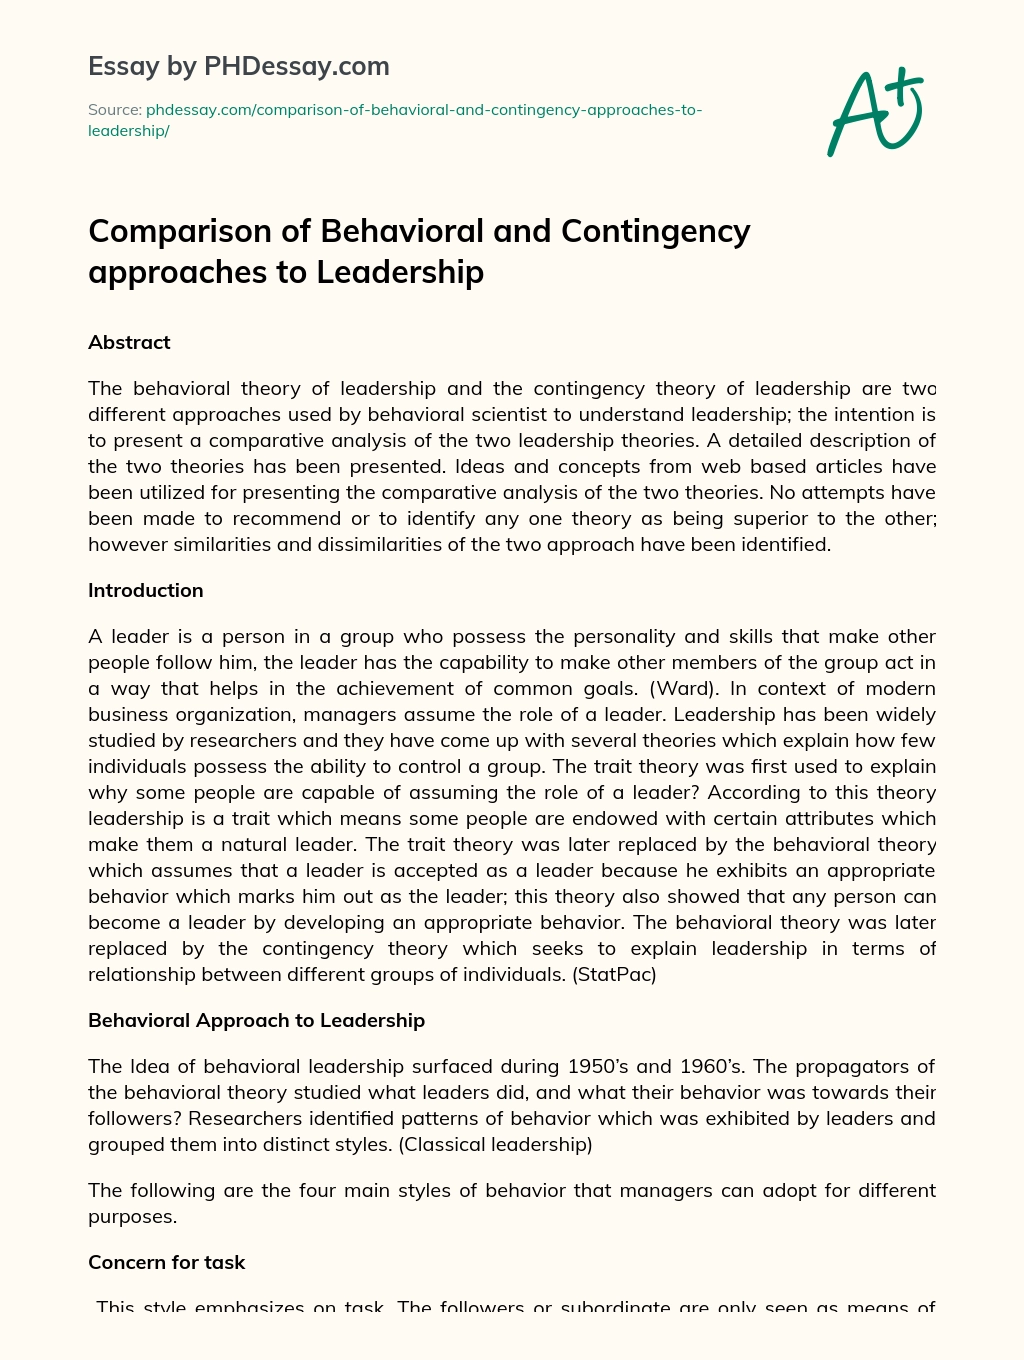 Comparison of Behavioral and Contingency approaches to Leadership essay